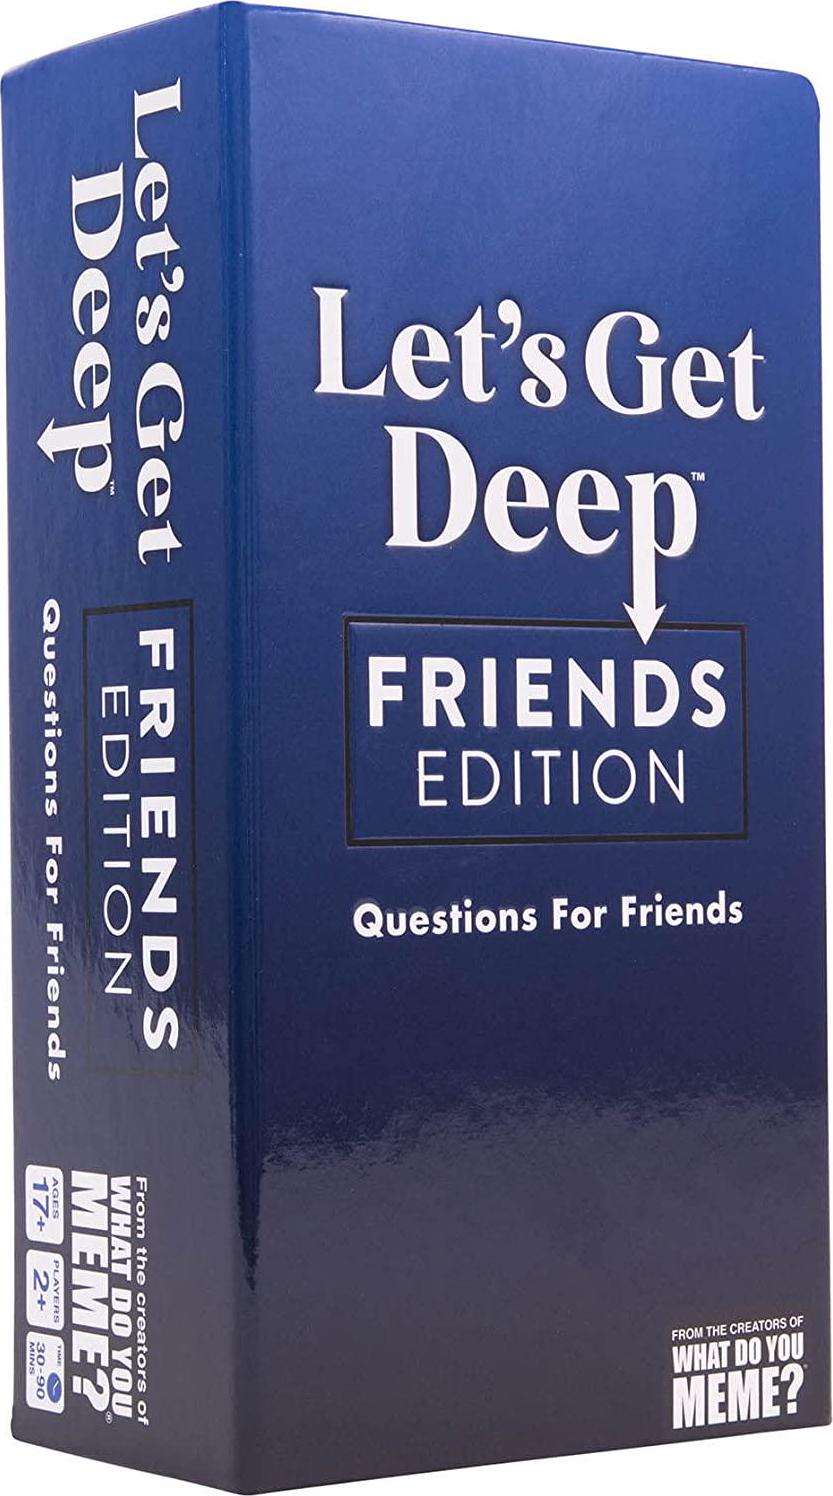 What Do You Meme?, Let's Get Deep: Friends Edition Â The Party Game Full of Hilarious and Unique Questions and Conversation Starters for Friends Â by What Do You Meme